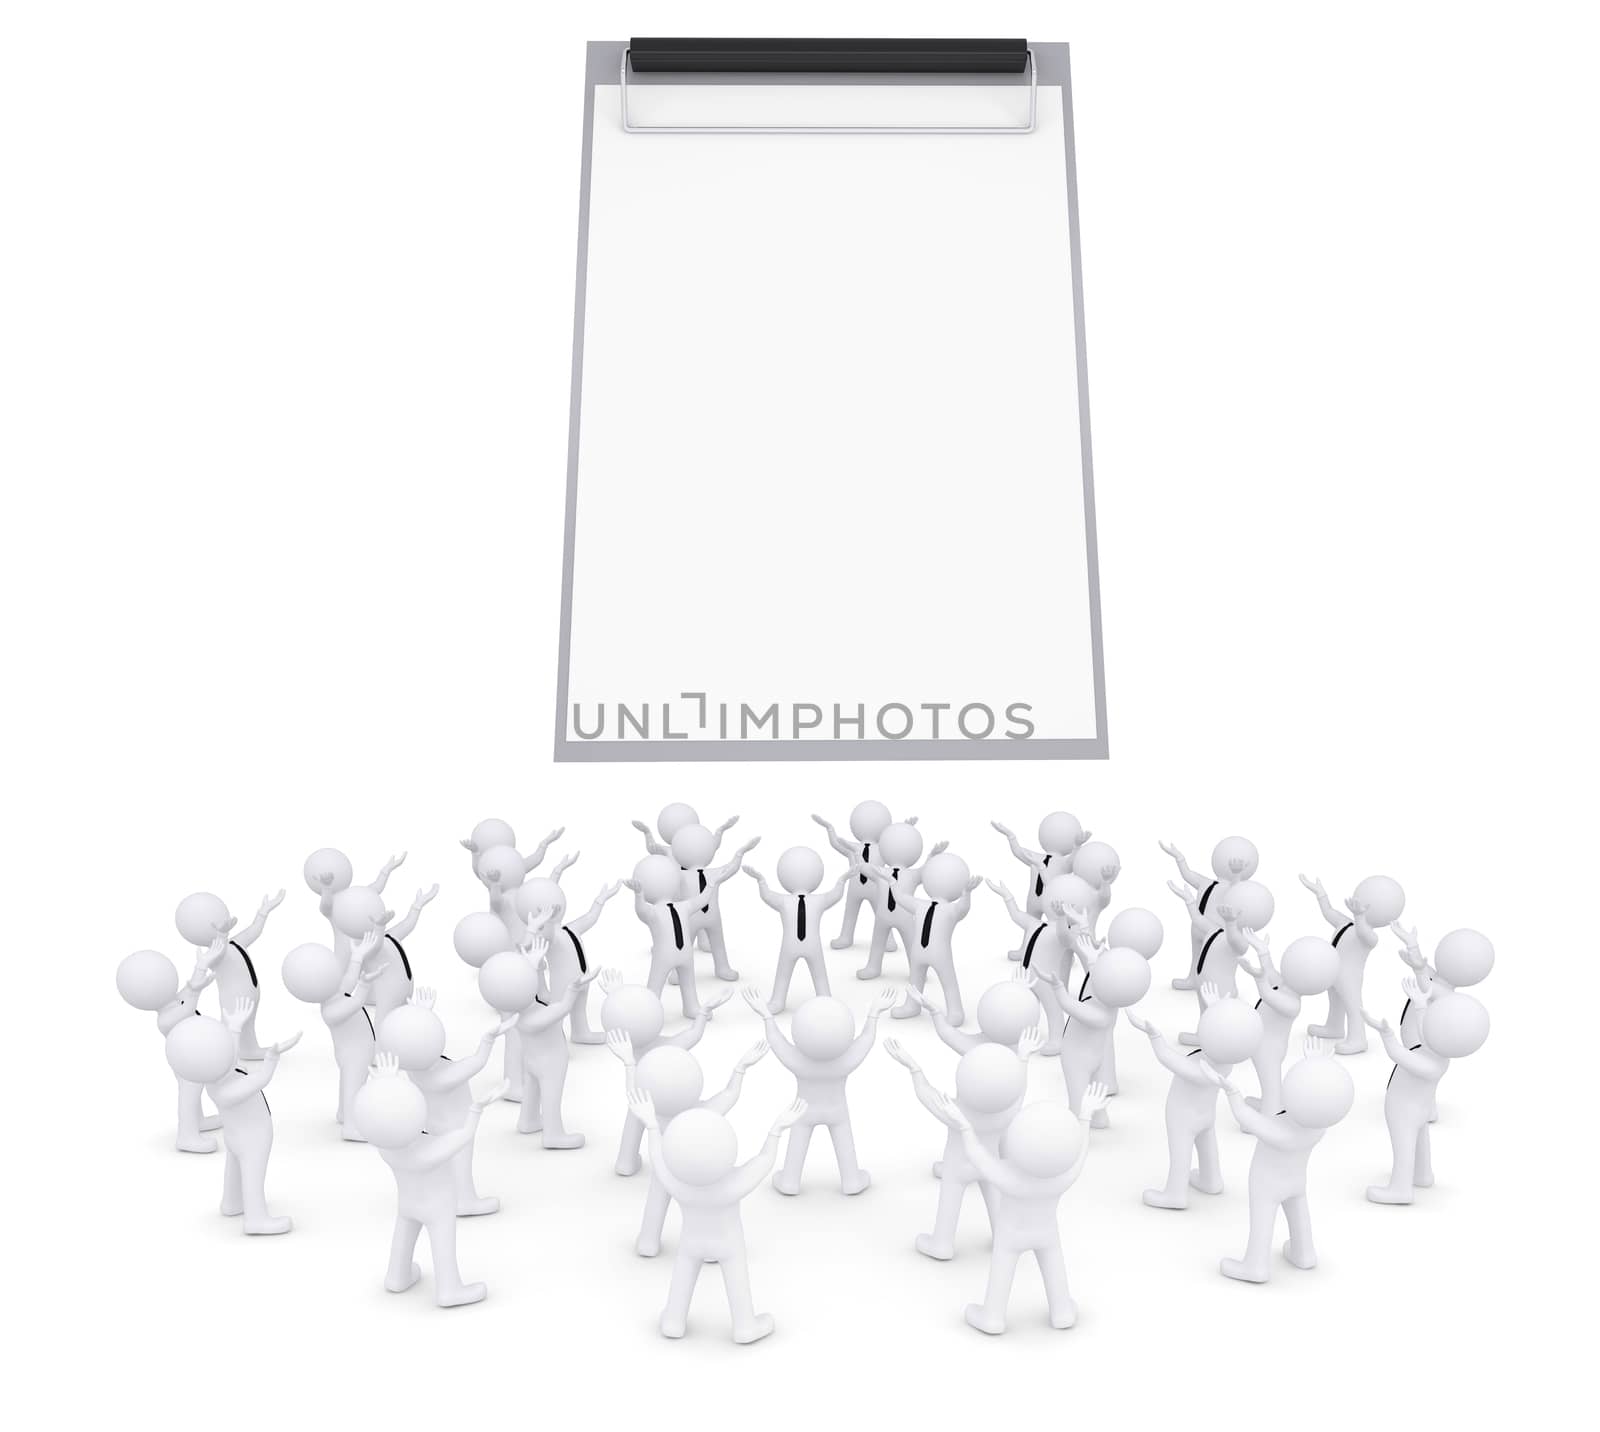 Group of white people worshiping checklist. 3d render isolated on white background